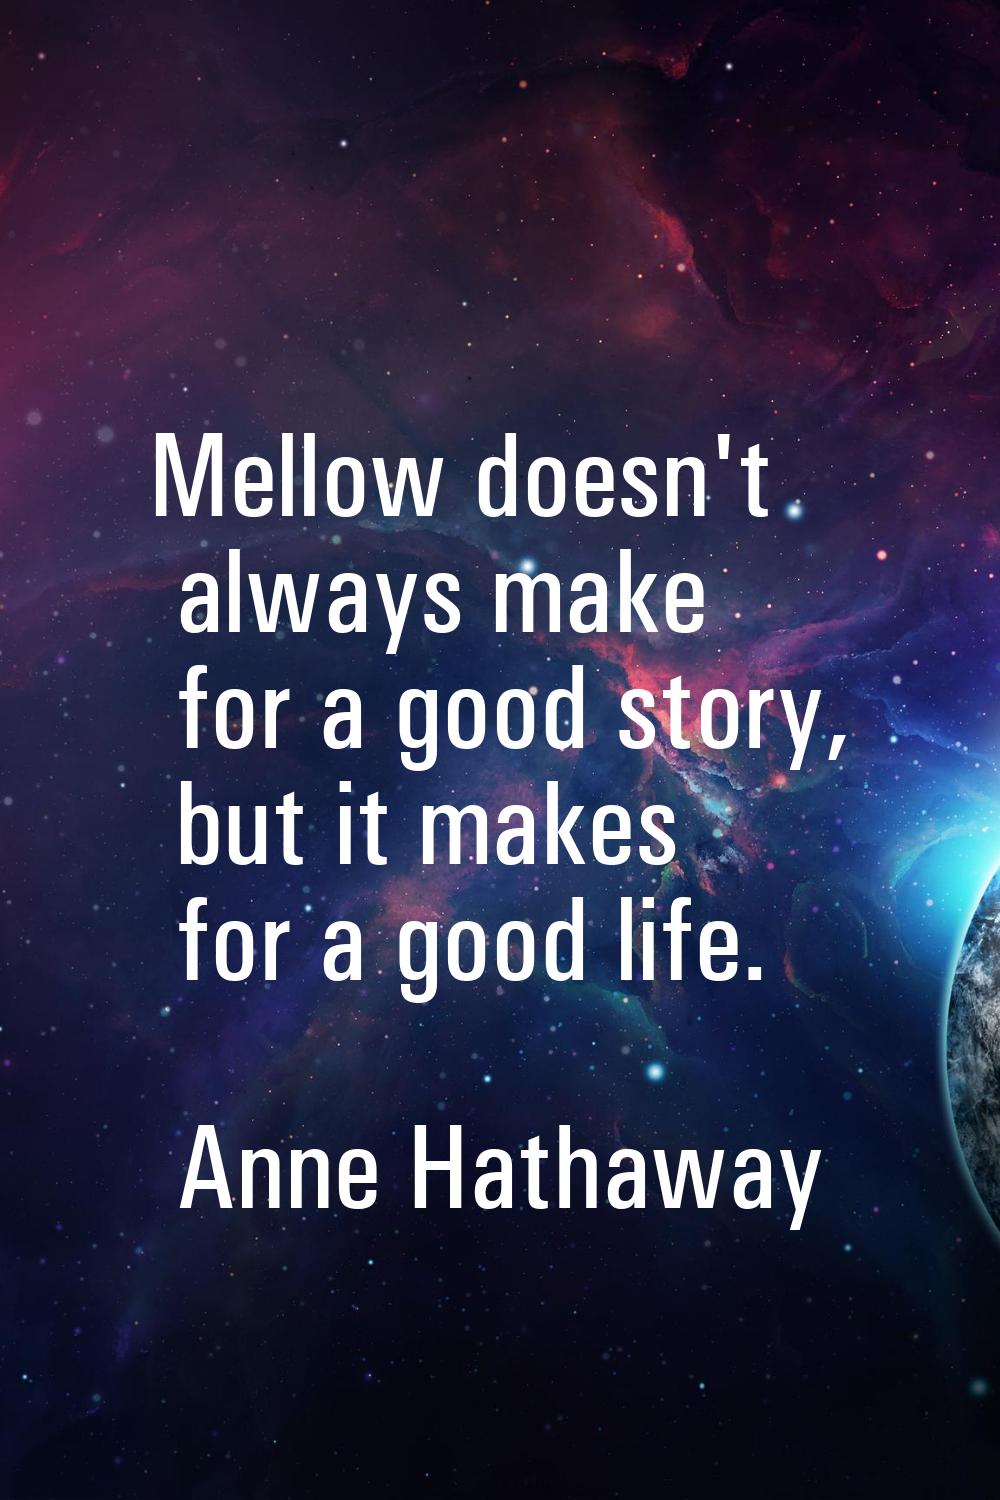 Mellow doesn't always make for a good story, but it makes for a good life.